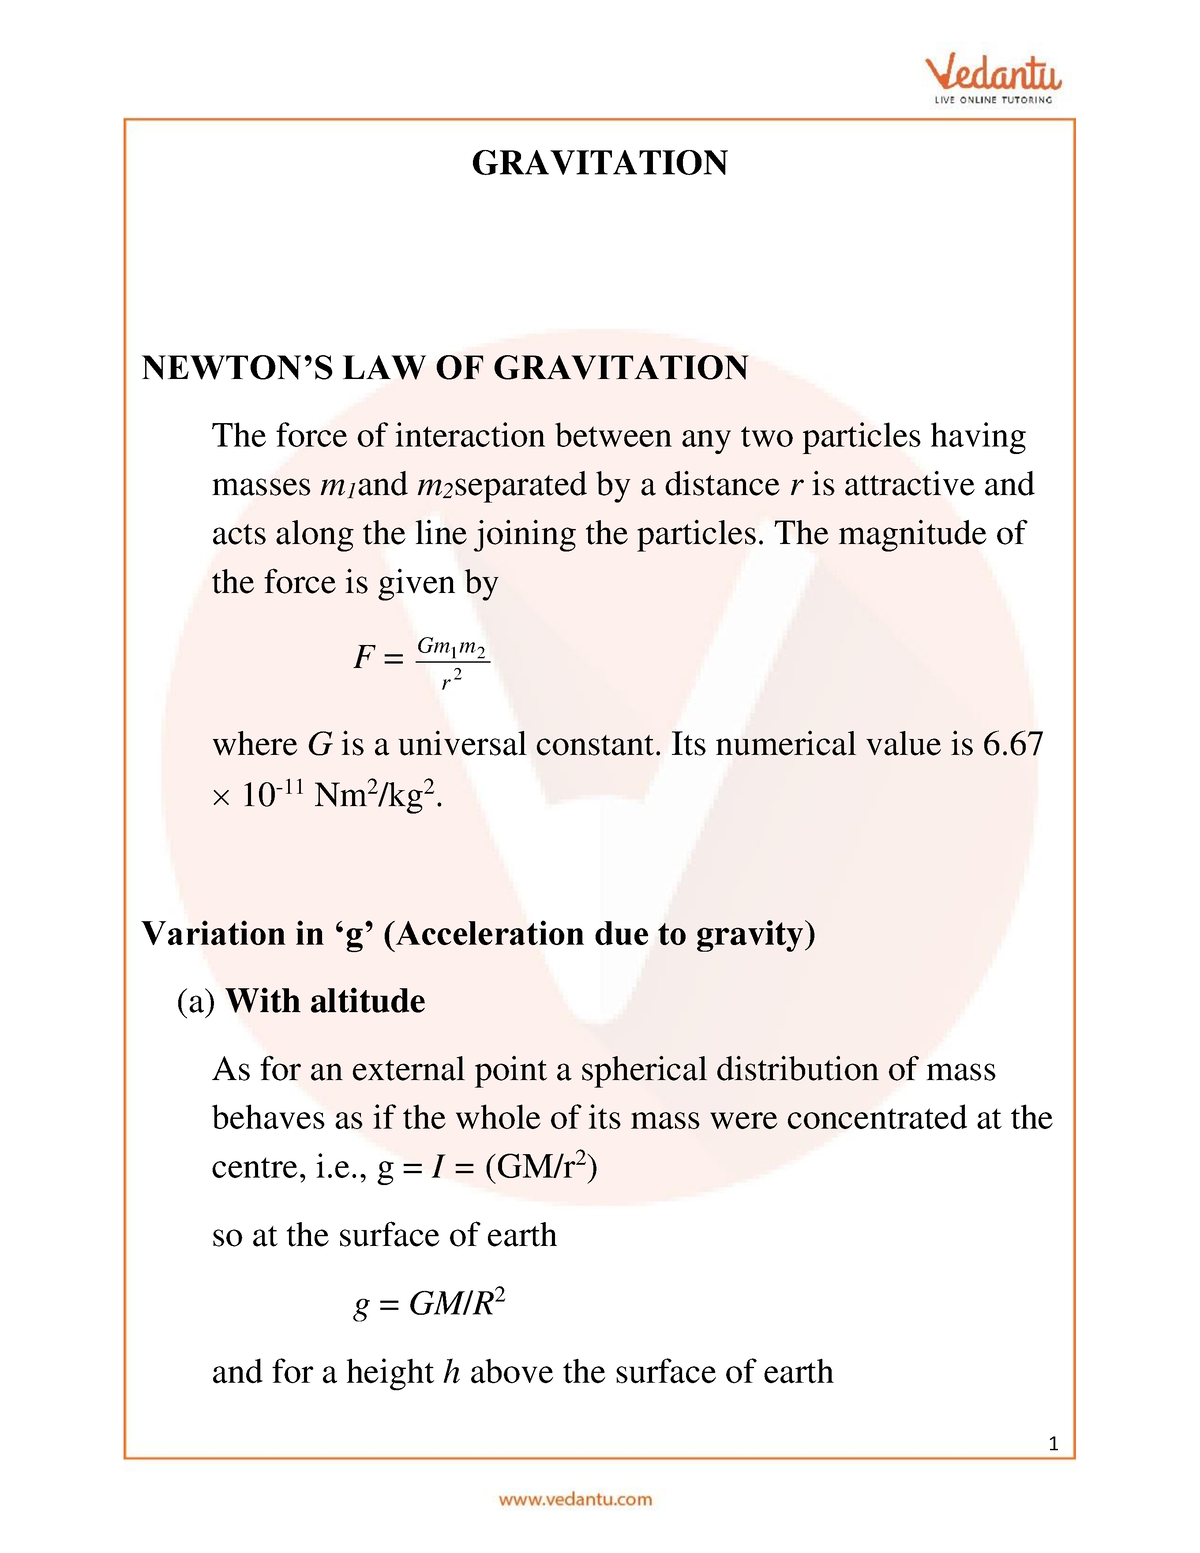 Jee Main 2023 24 Gravitation Revision Notes Free Pdf Download Gravitation Newtons Law Of 1420